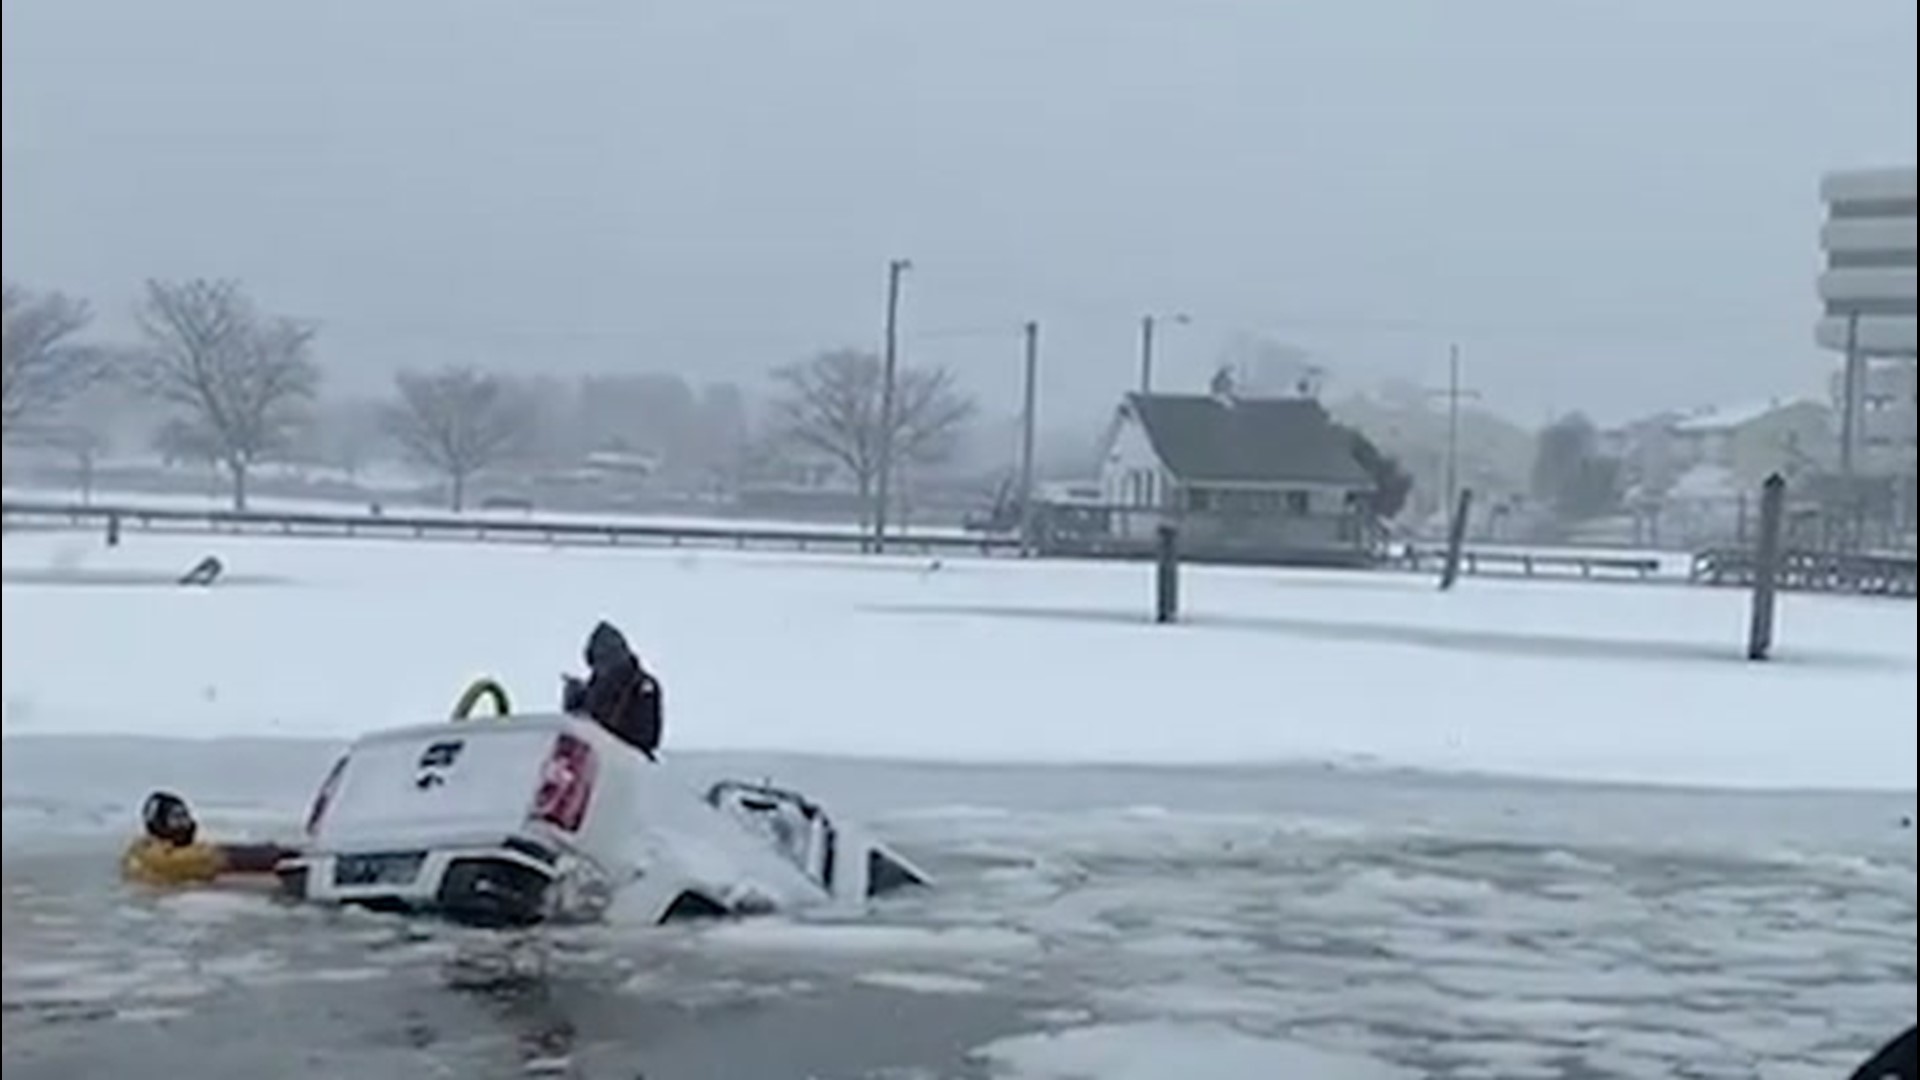 On Monday, Feb. 1, emergency crews rescued two people after a truck plunged into icy water at Cummings Park in Stamford, Connecticut, during a snowstorm.